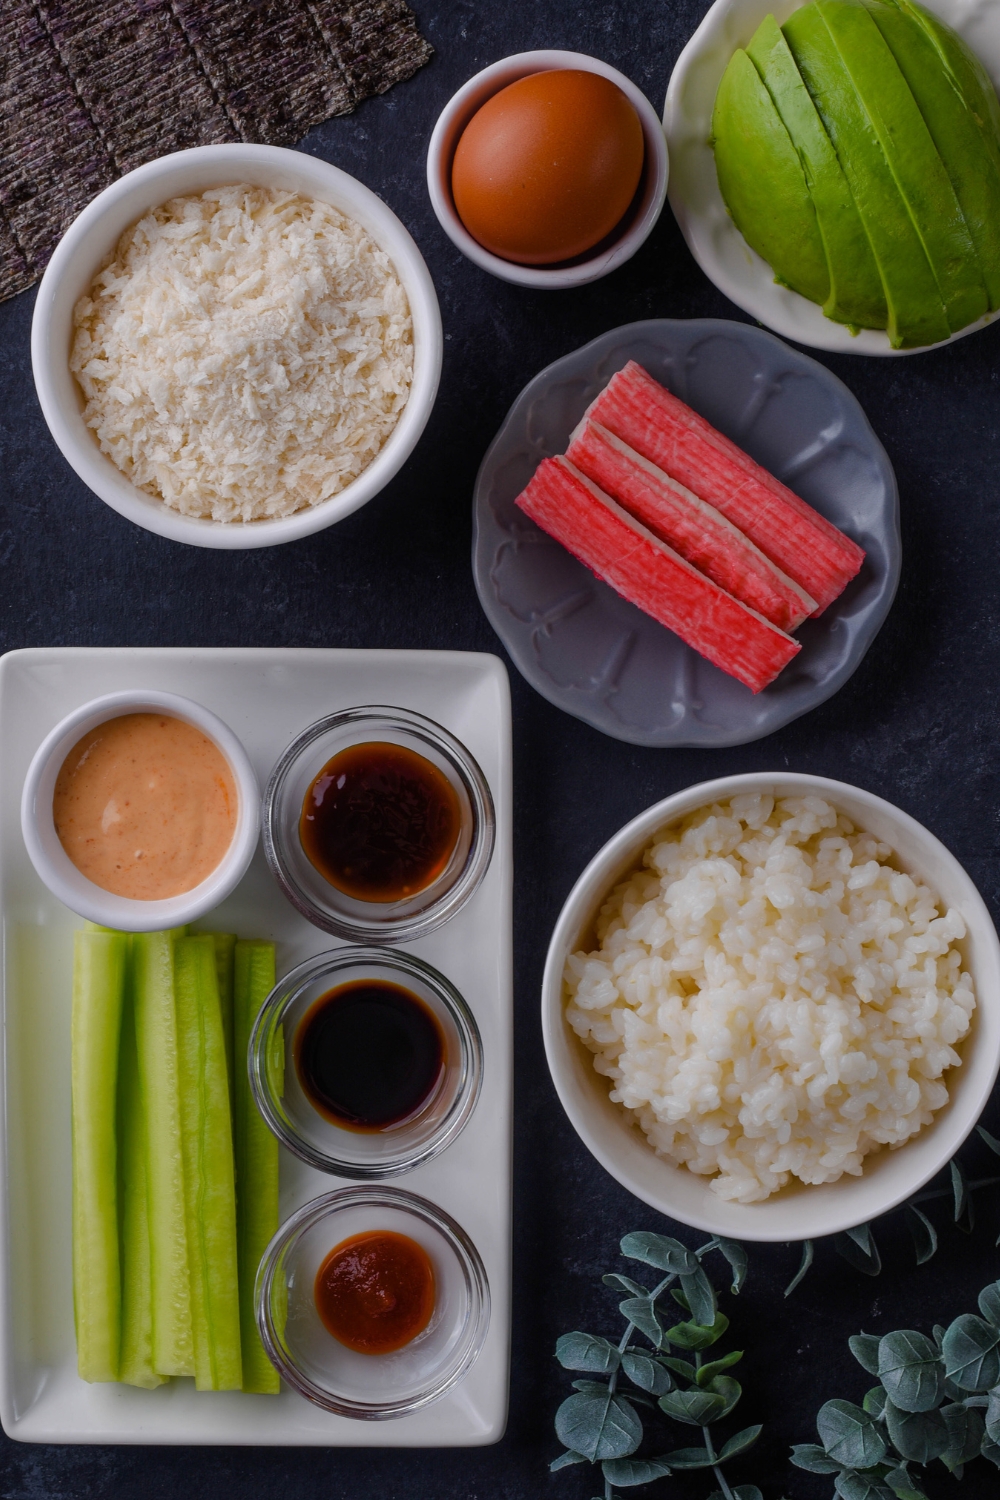 An overhead view of cooked rice, imitation crab, Half of an avocado, an egg, breadcrumbs, spicy mayo, soy sauce, oyster sauce, Sriracha sauce, and sliced cucumbers.